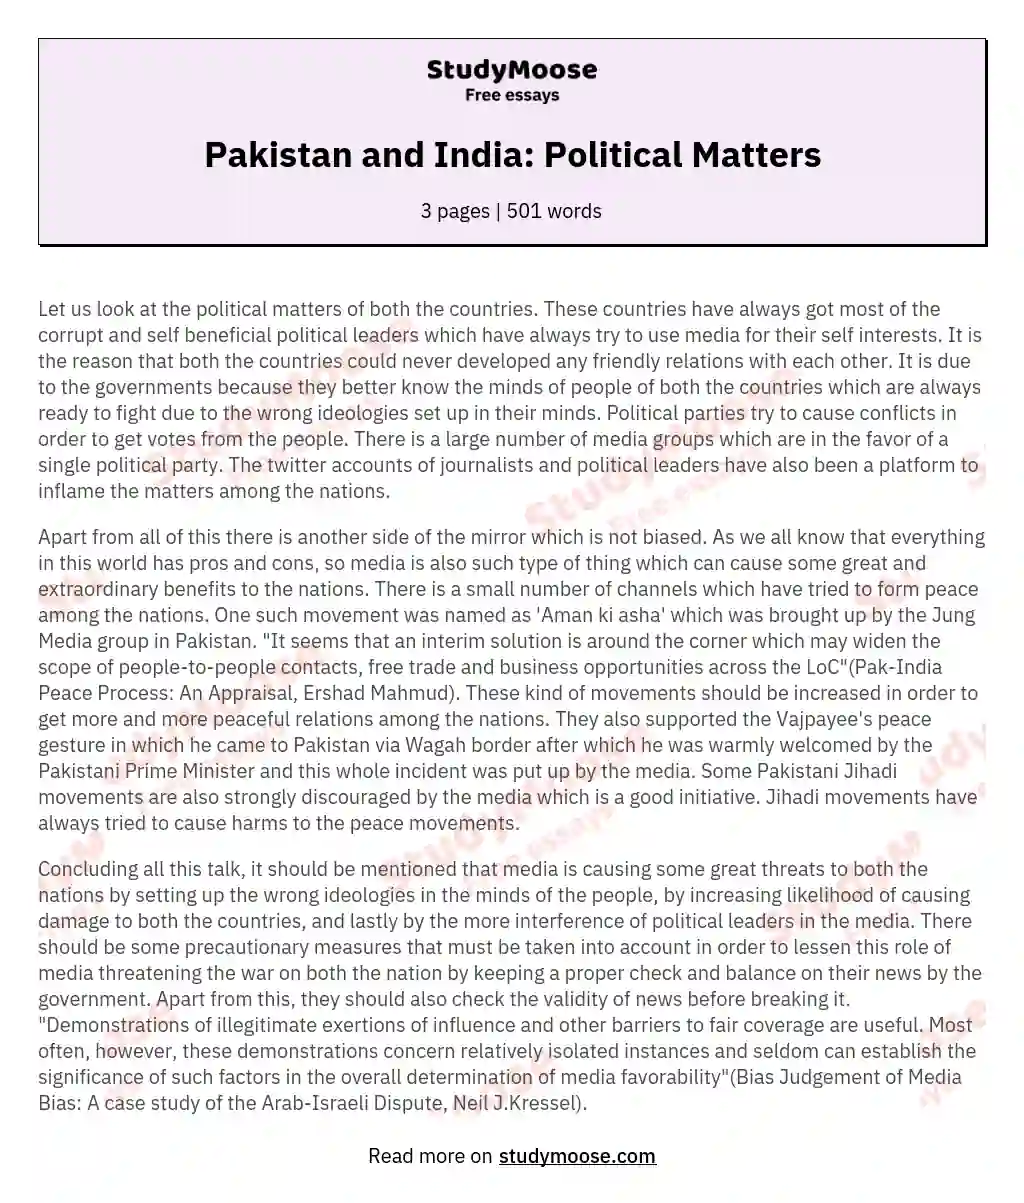 Pakistan and India: Political Matters